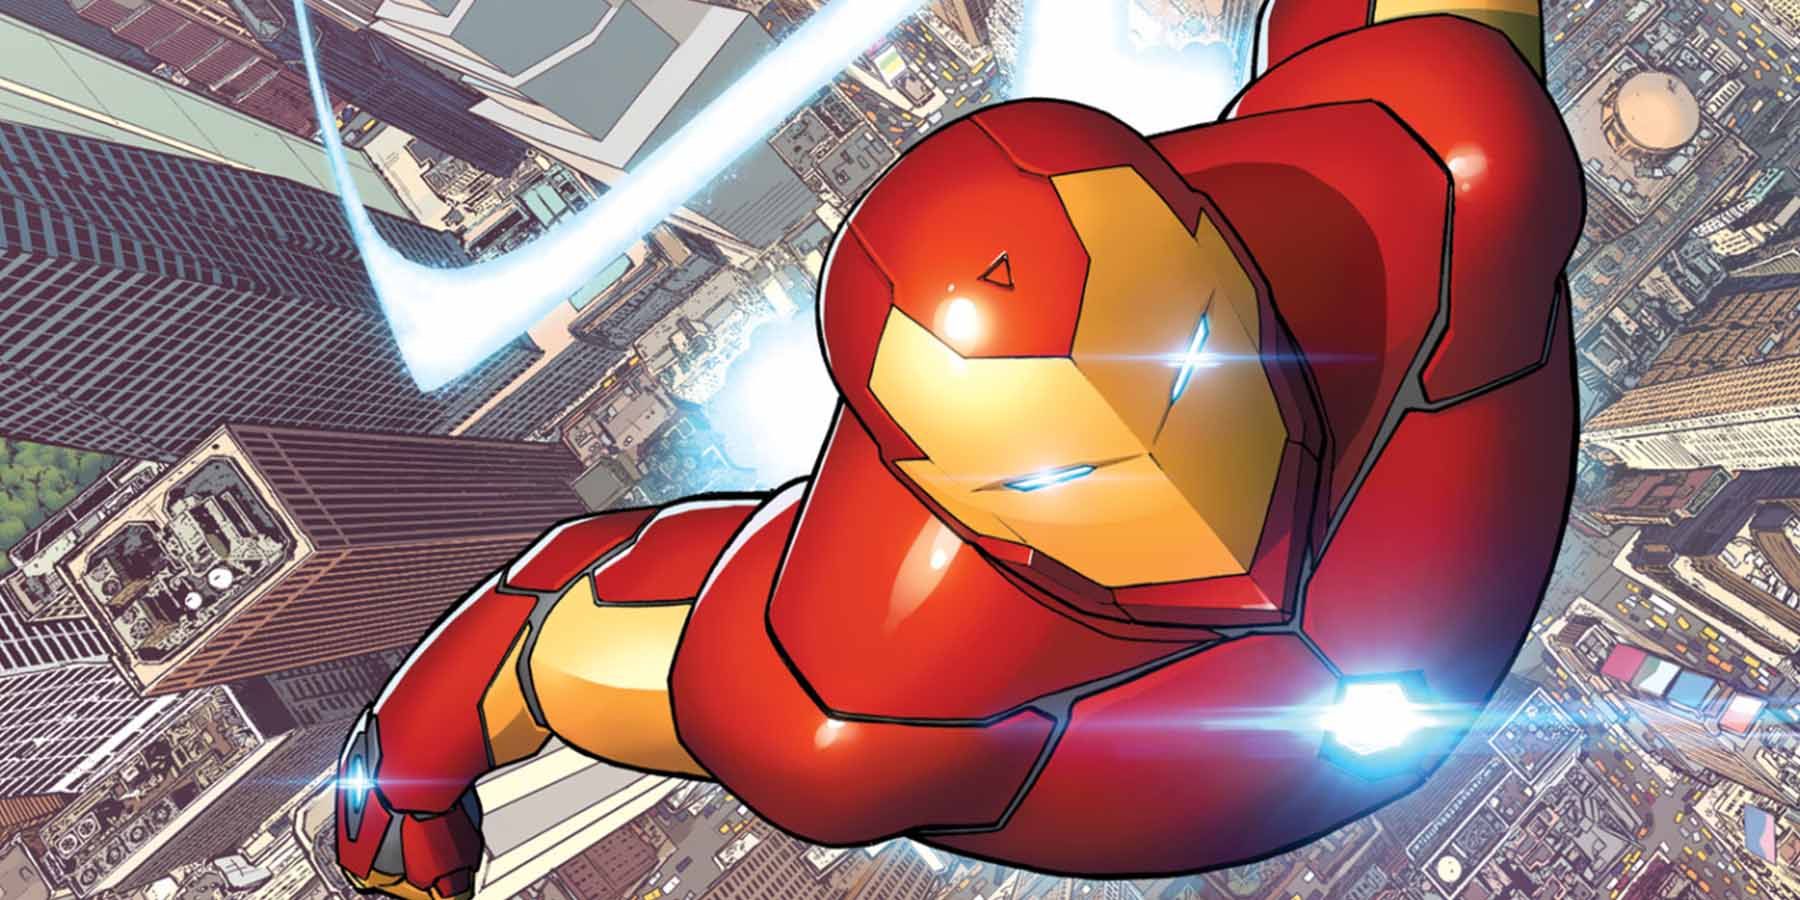 Iron Man flying in the city in The Invincible Iron Man comics